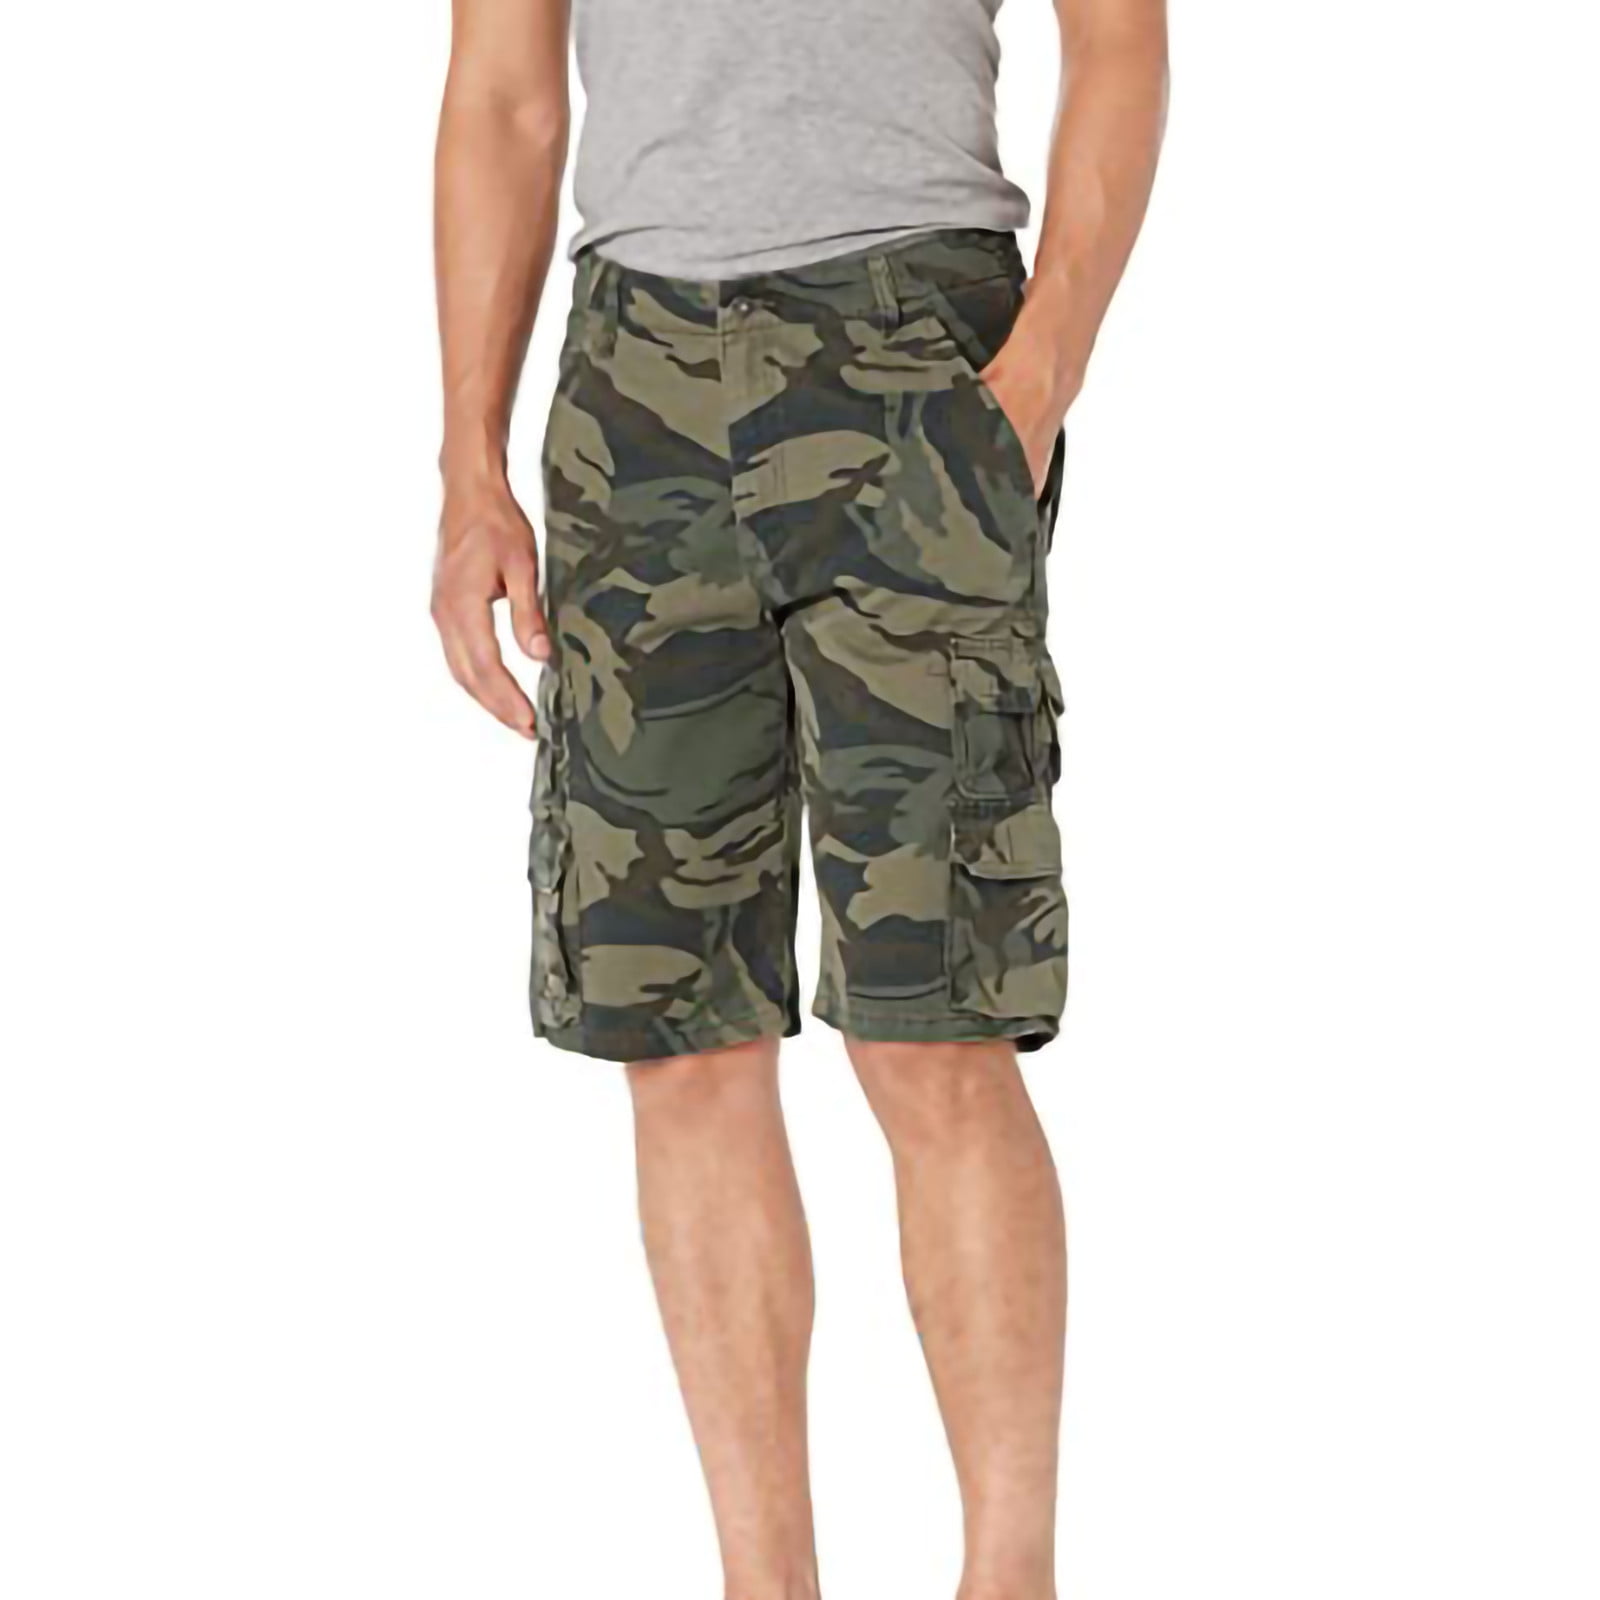 Summer New Men Trousers Camouflage Shorts Cargo Shorts Multi-pocket Pants S-2XL 